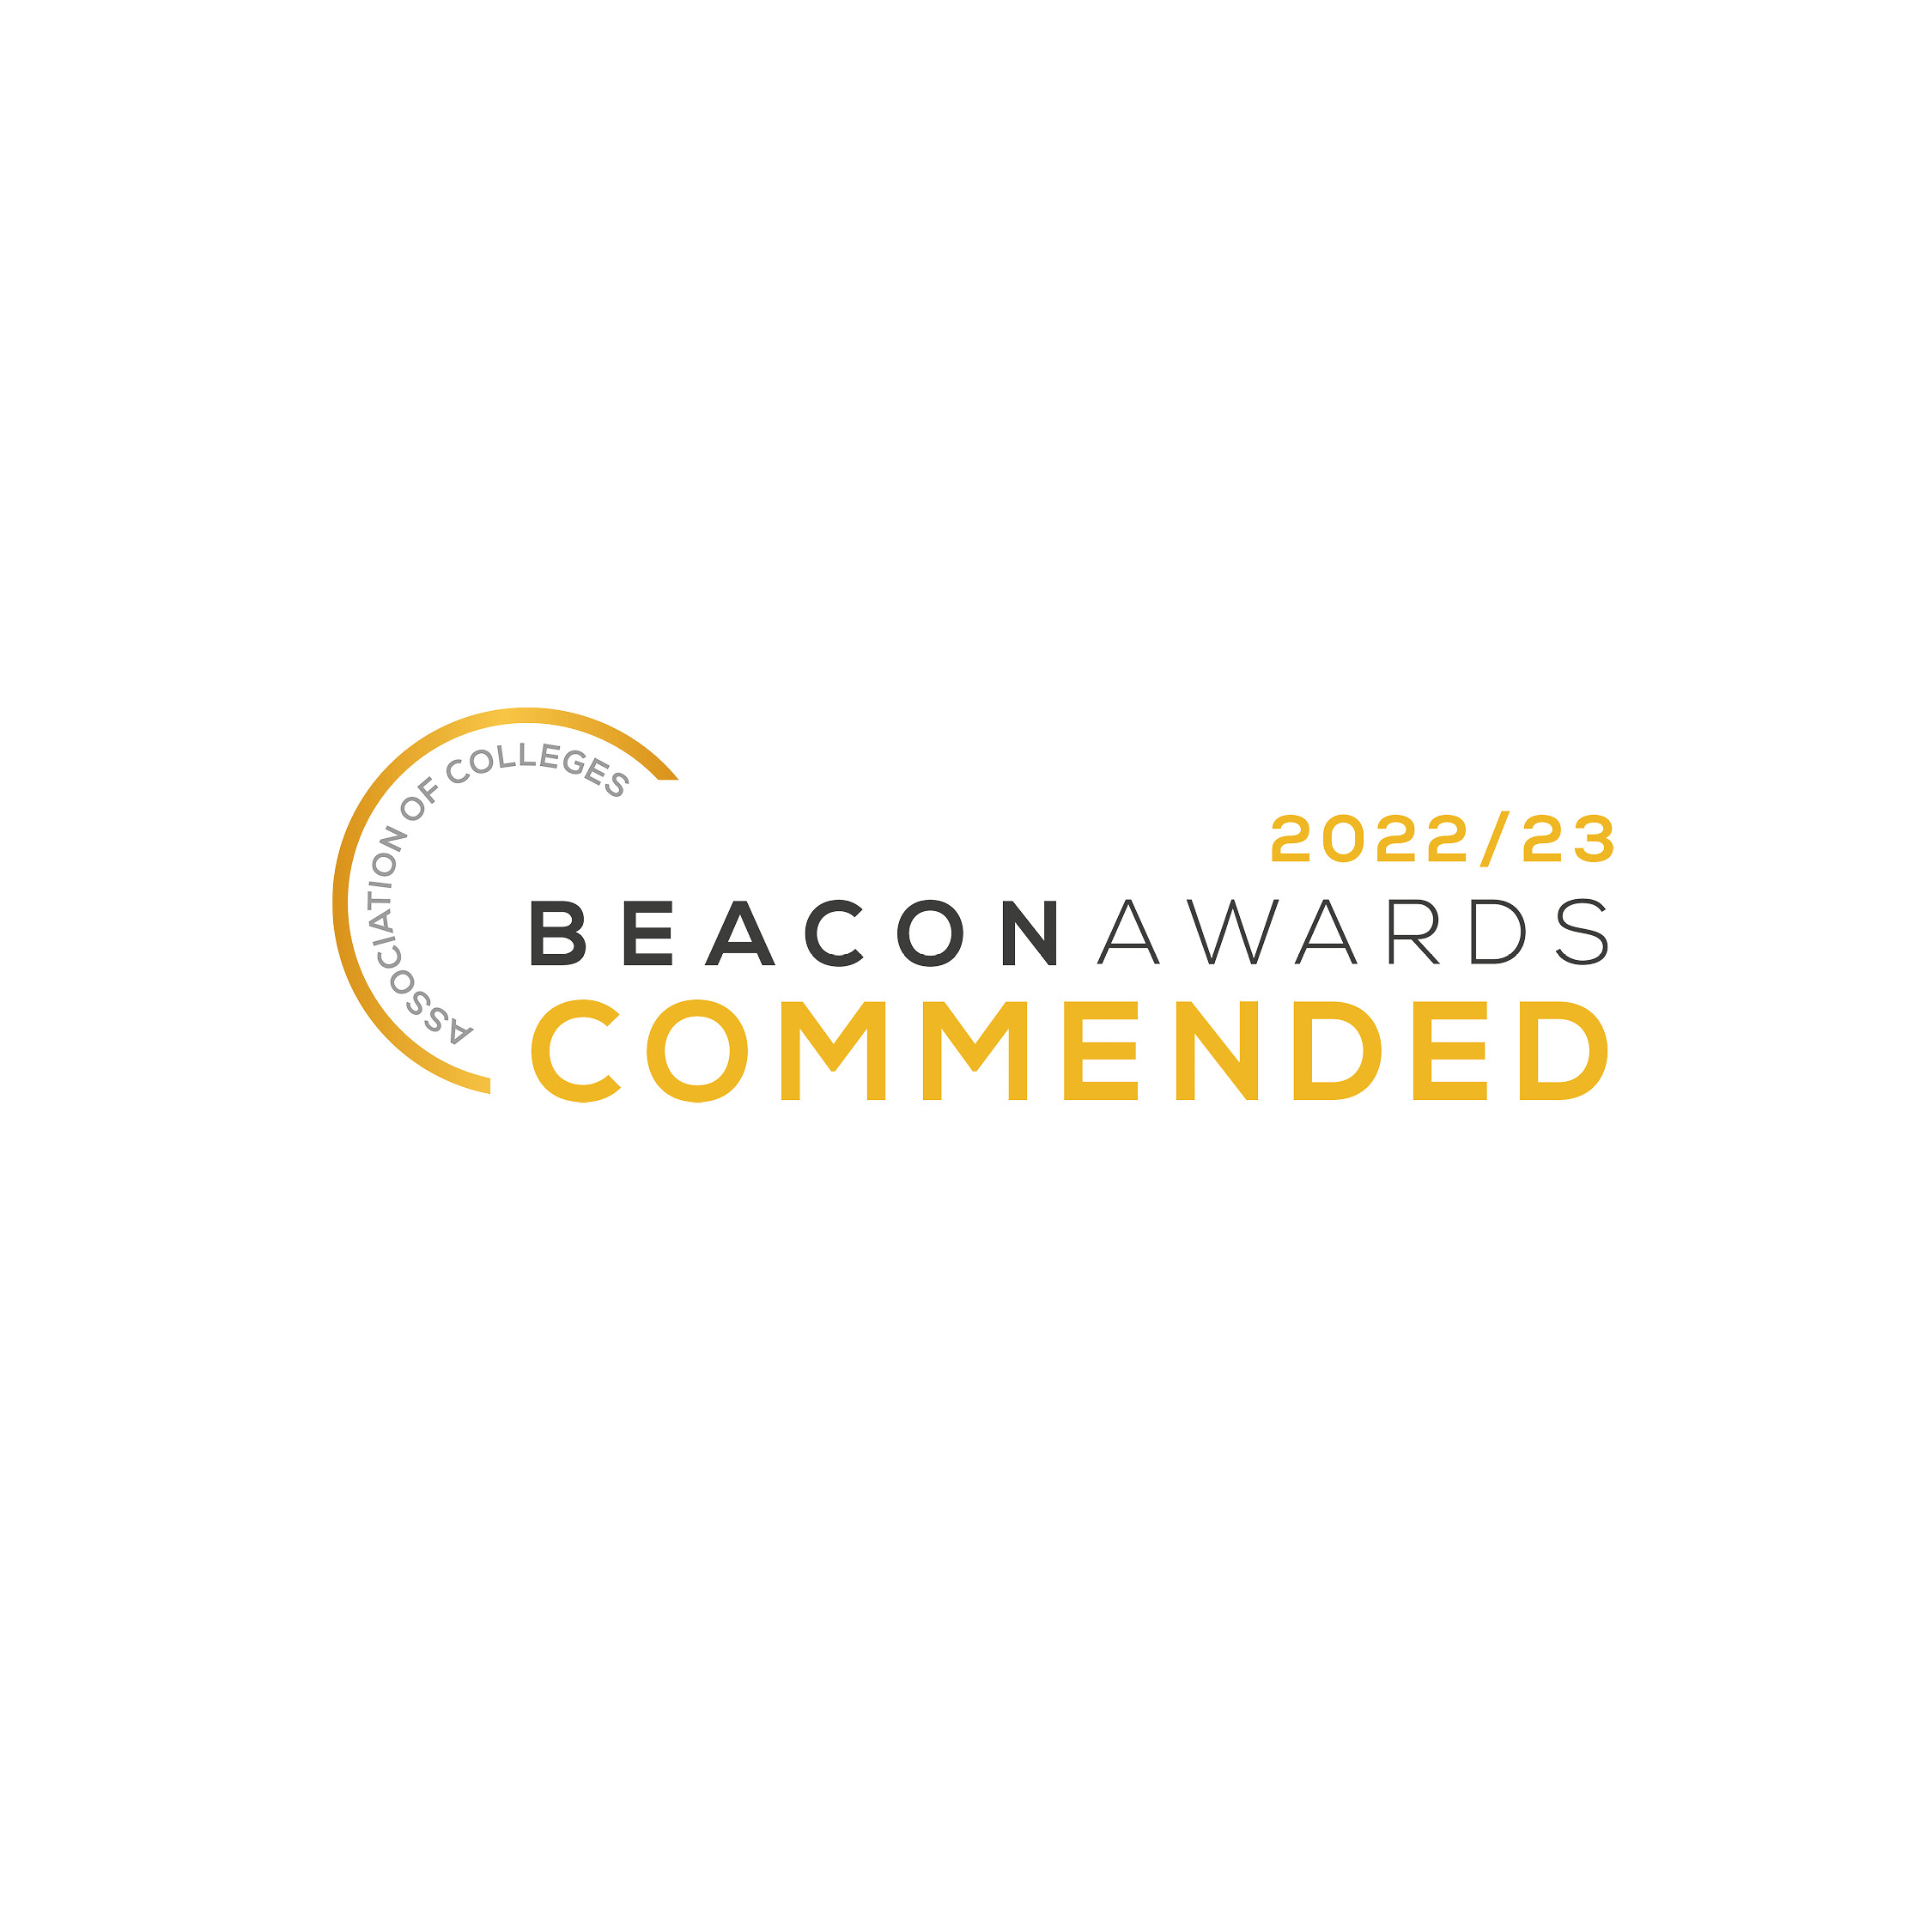 Beacon awards commended